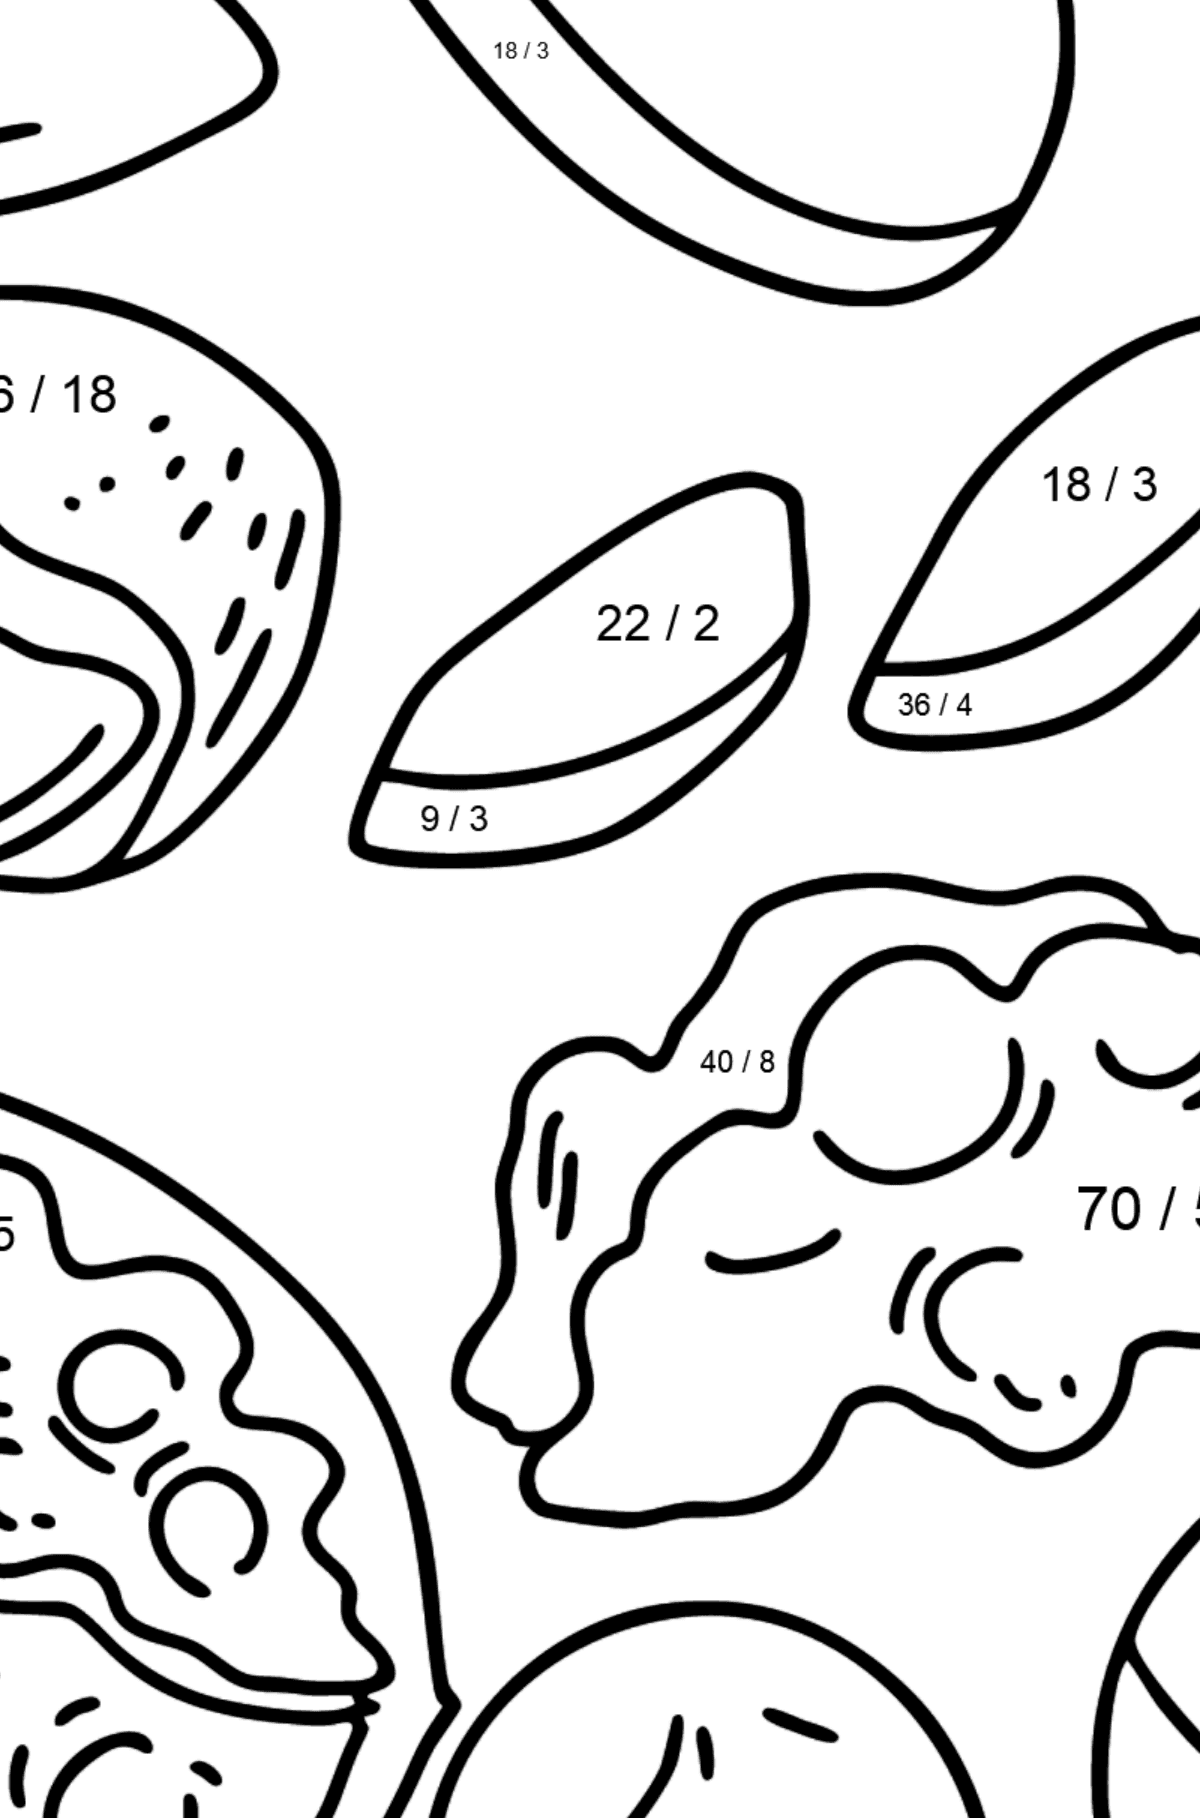 Nuts: Walnuts, Macadamia, Almonds and Peanuts coloring page - Math Coloring - Division for Kids